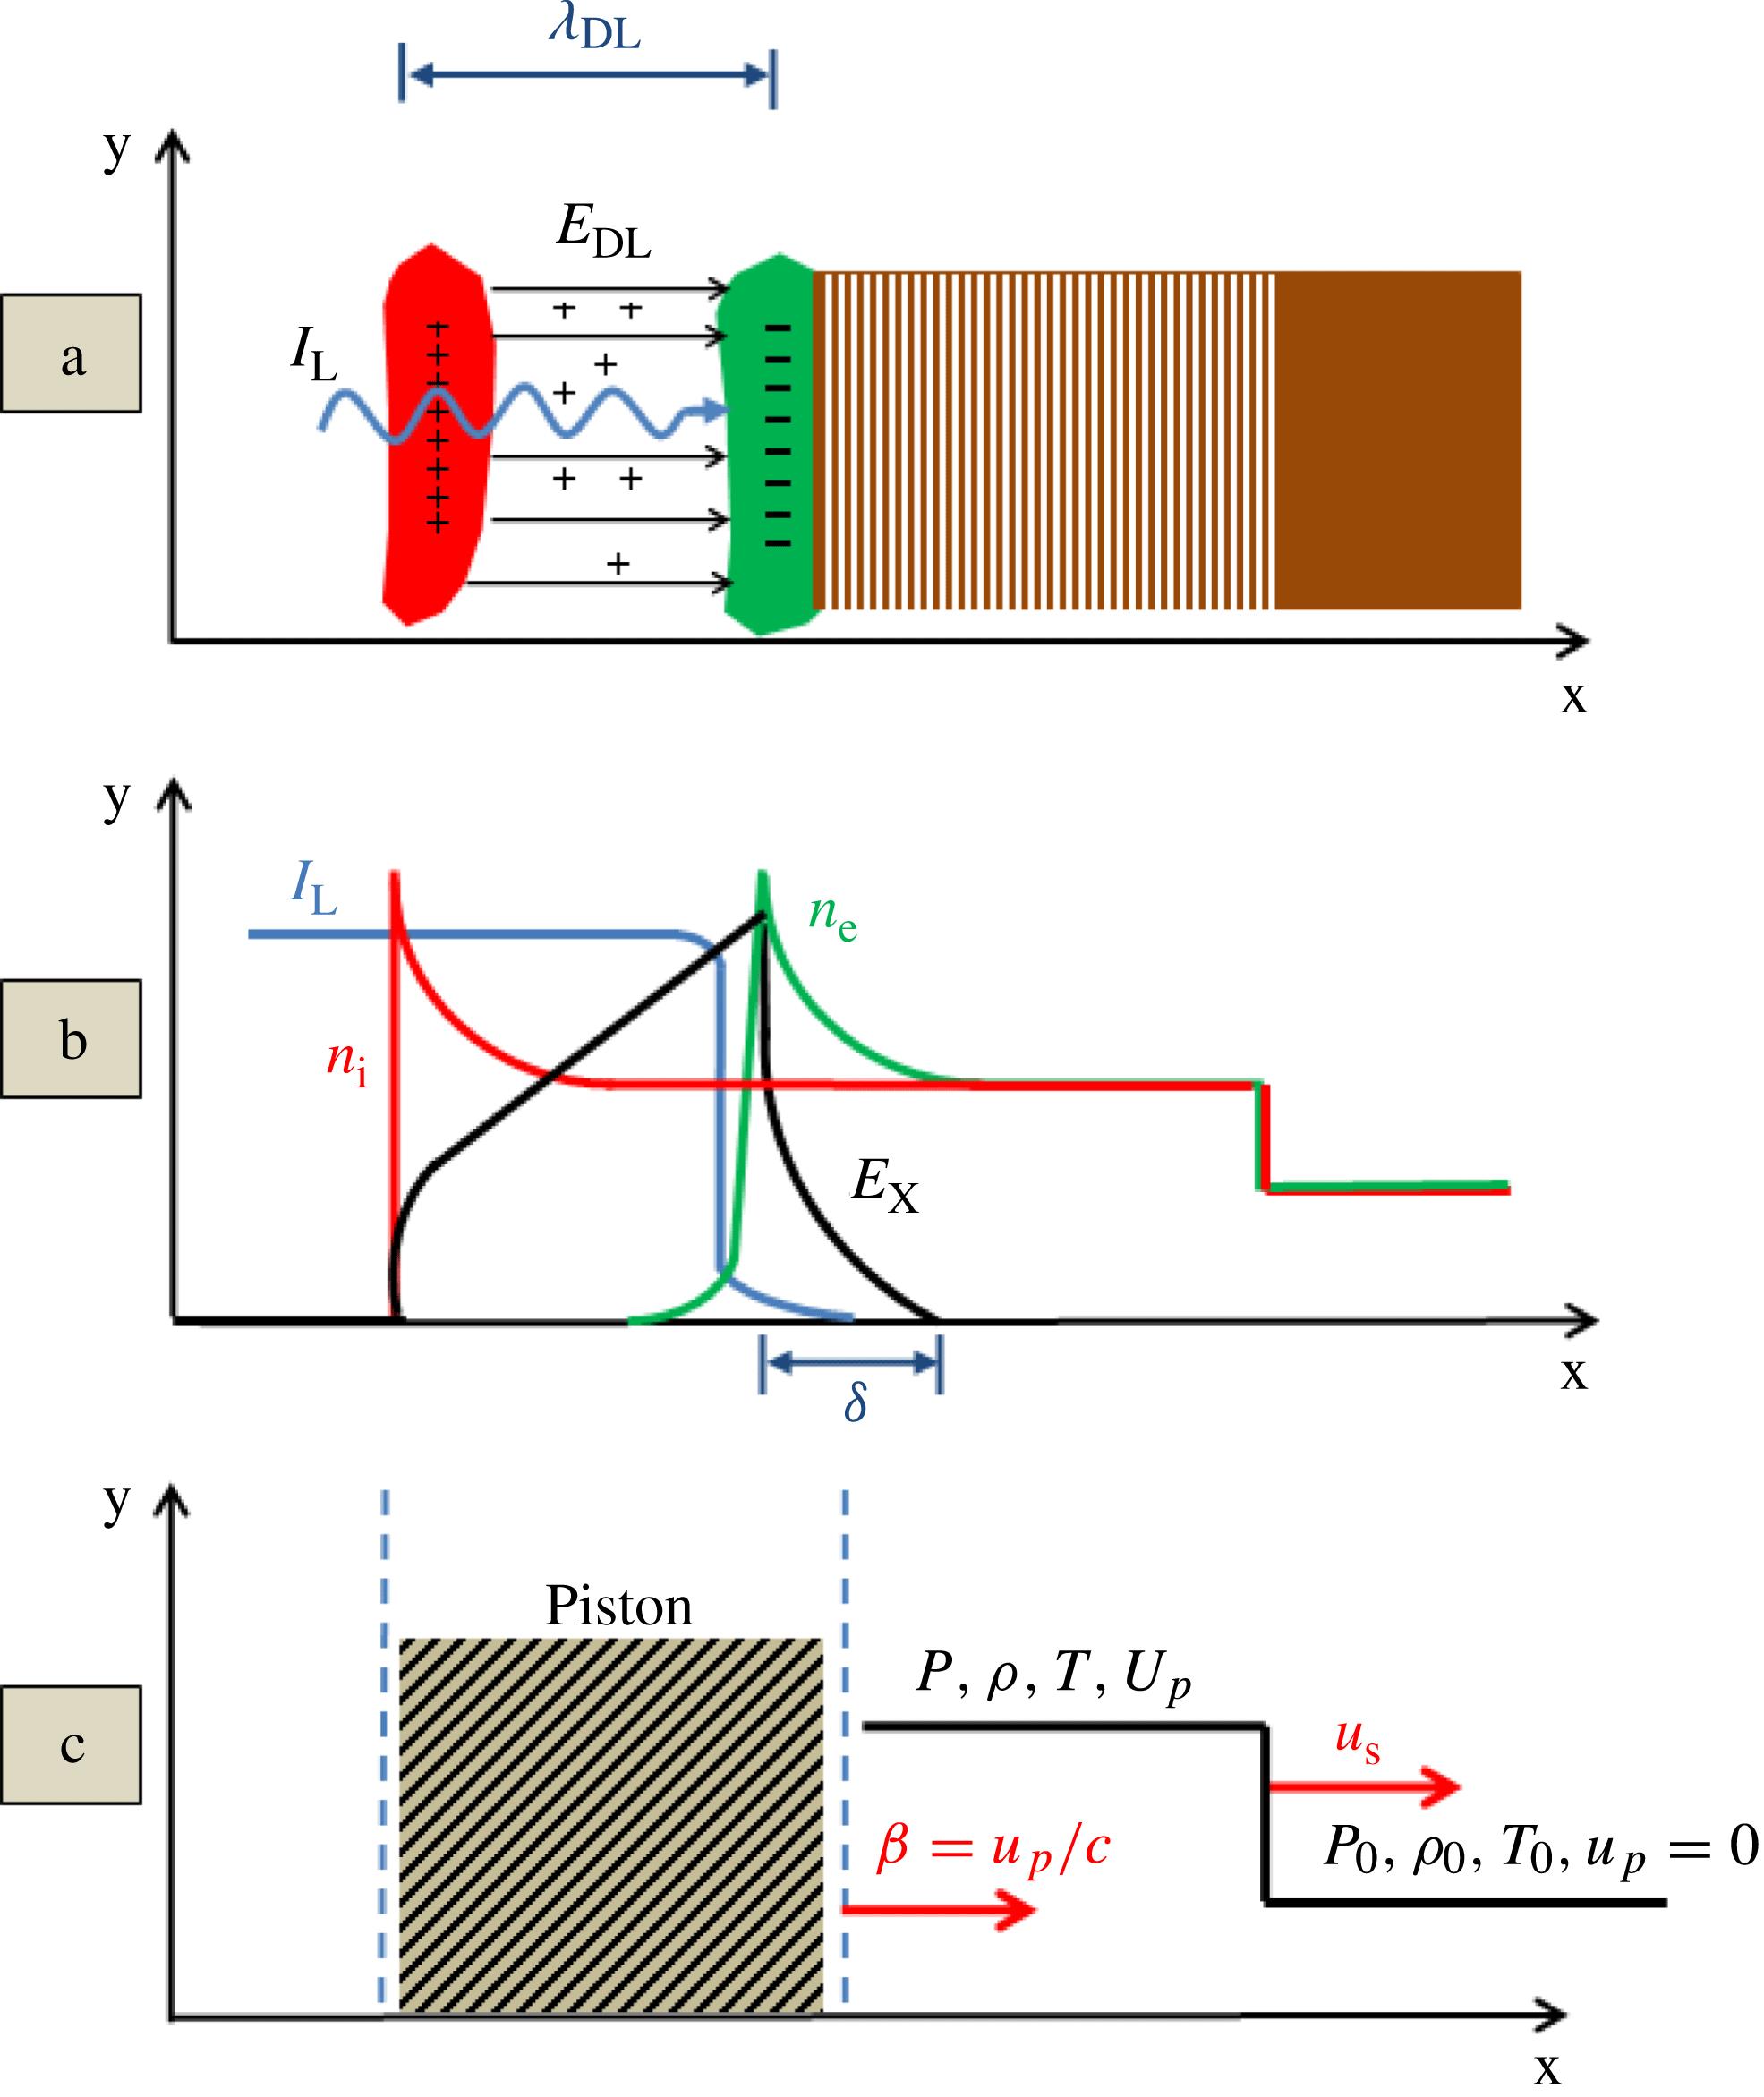 (a) The capacitor model for laser irradiances where the ponderomotive force dominates the interaction. (b) The parameters that define our capacitor model: and are the electron and ion densities accordingly, is the electric field, is the distance between the positive and negative DL charges. The DL is geometrically followed by a neutral plasma where the electric field decays within a skin depth and a shock wave is created. (c) The shock wave description in the piston model.